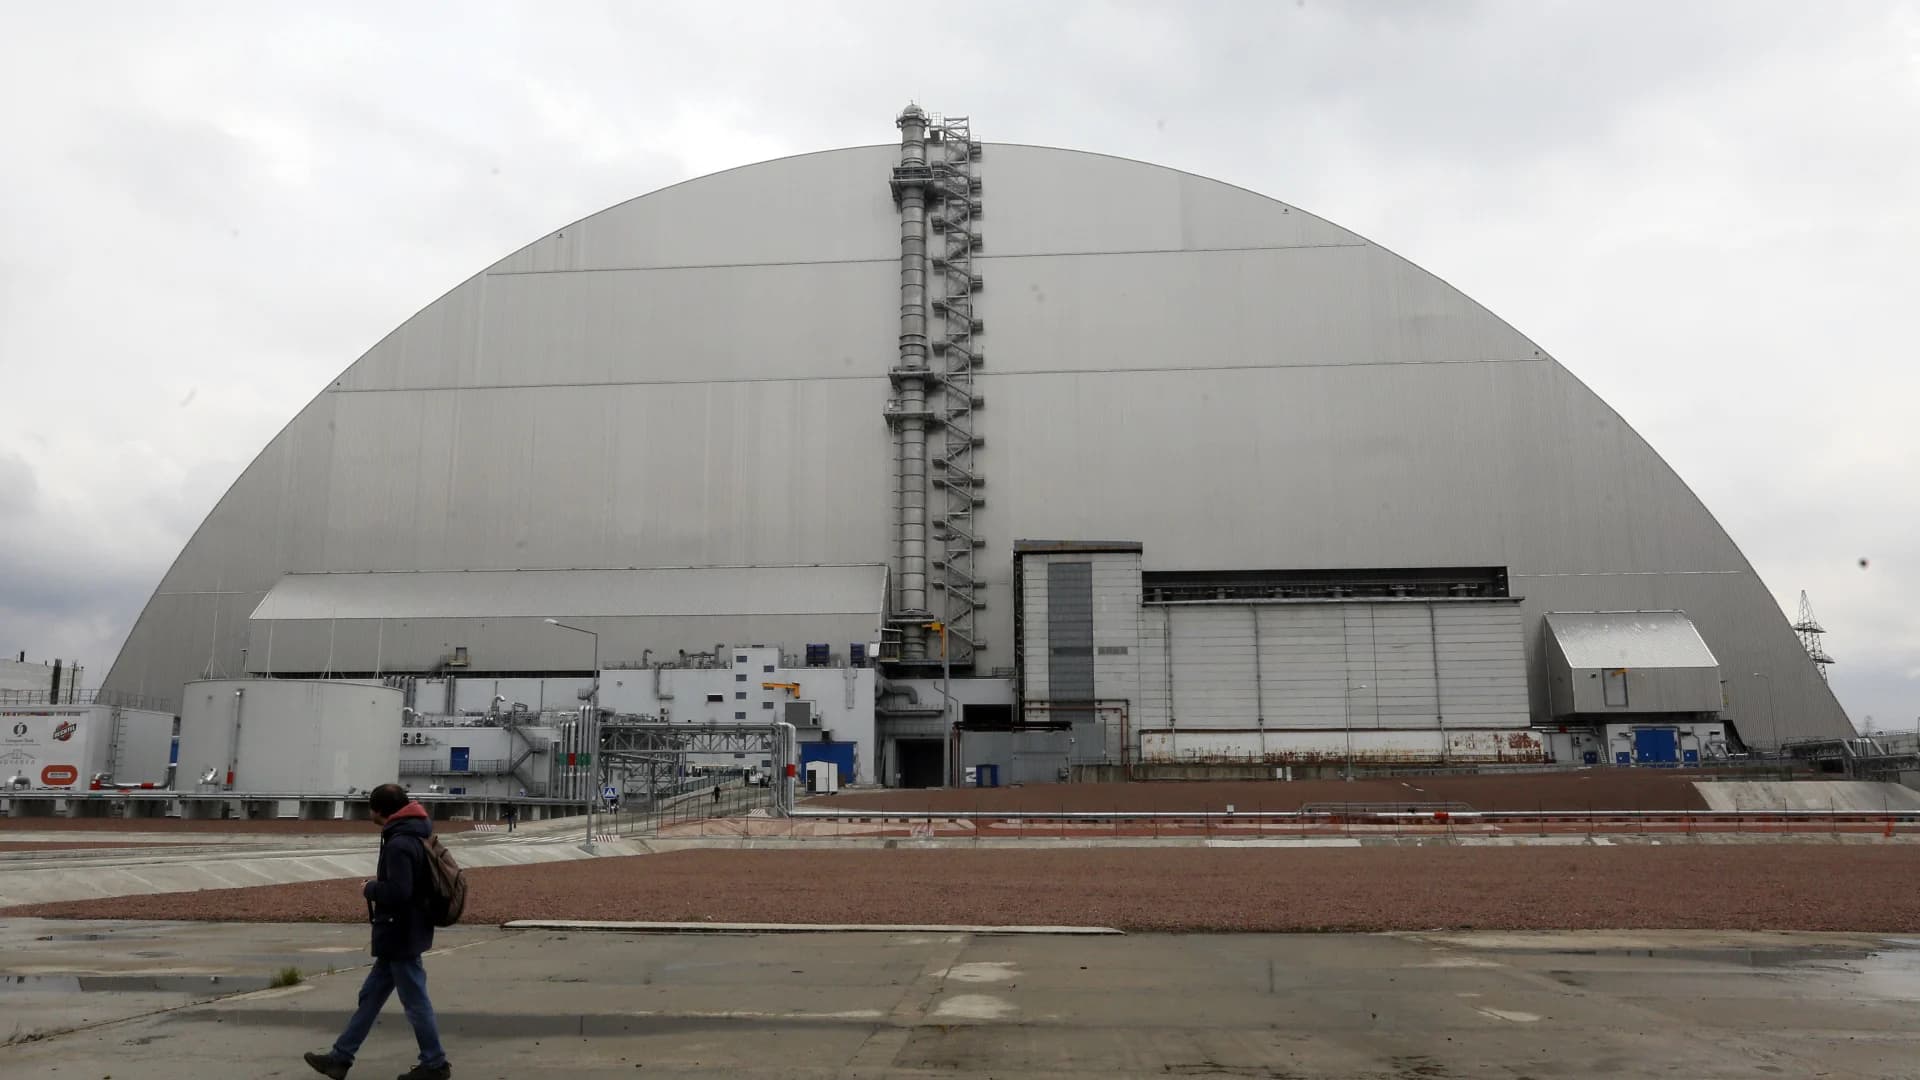 EXPLAINER: What's behind latest scare at Chernobyl plant?